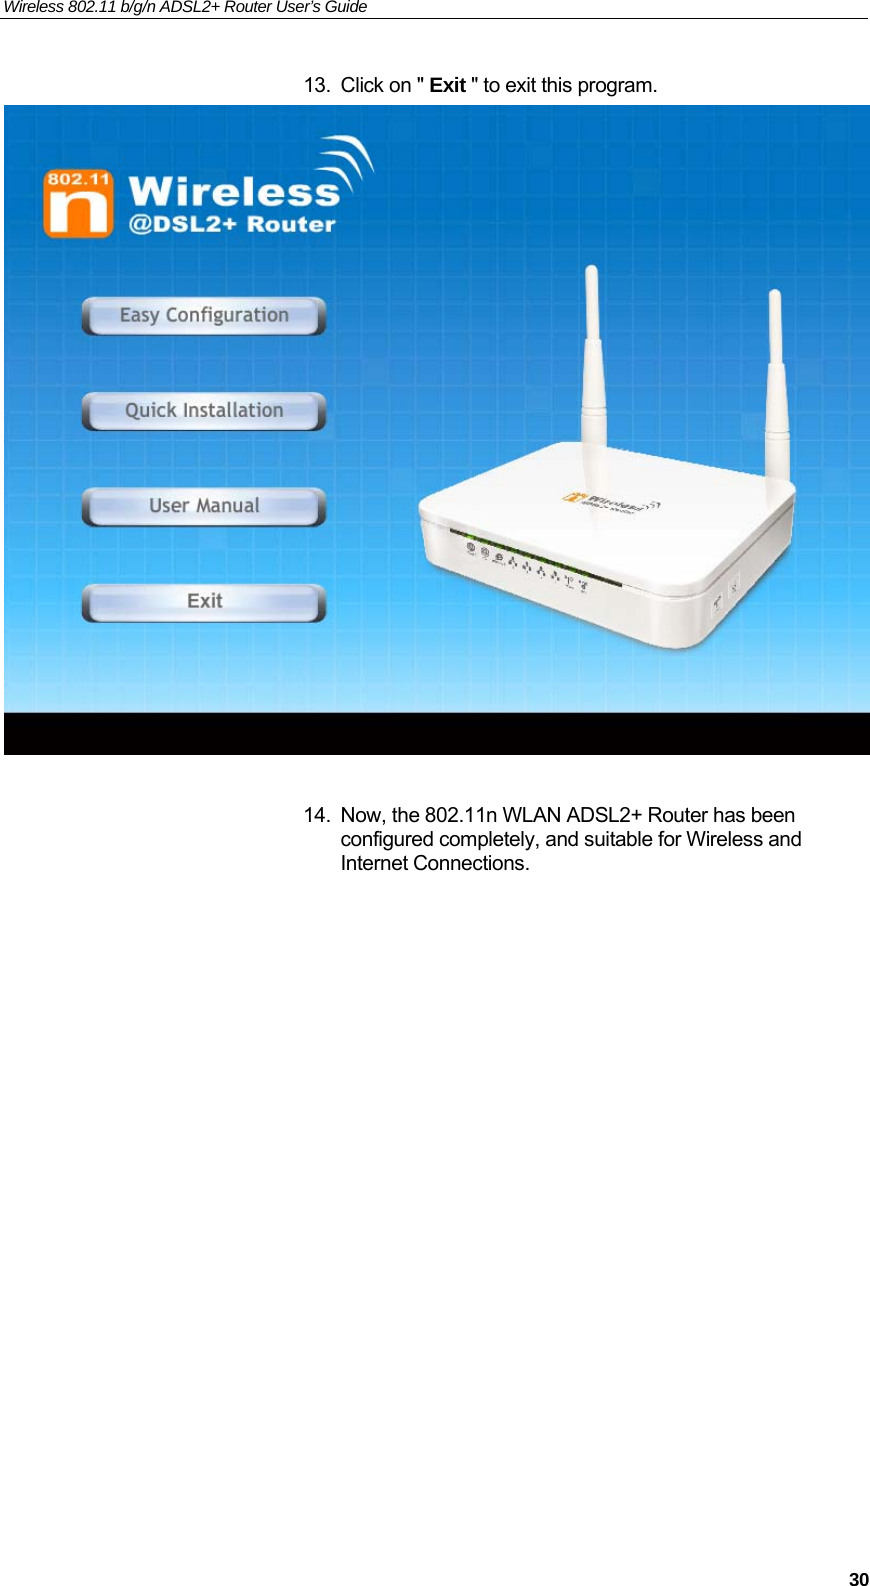 Wireless 802.11 b/g/n ADSL2+ Router User’s Guide    13.  Click on &quot; Exit &quot; to exit this program.   14.  Now, the 802.11n WLAN ADSL2+ Router has been configured completely, and suitable for Wireless and Internet Connections.                 30